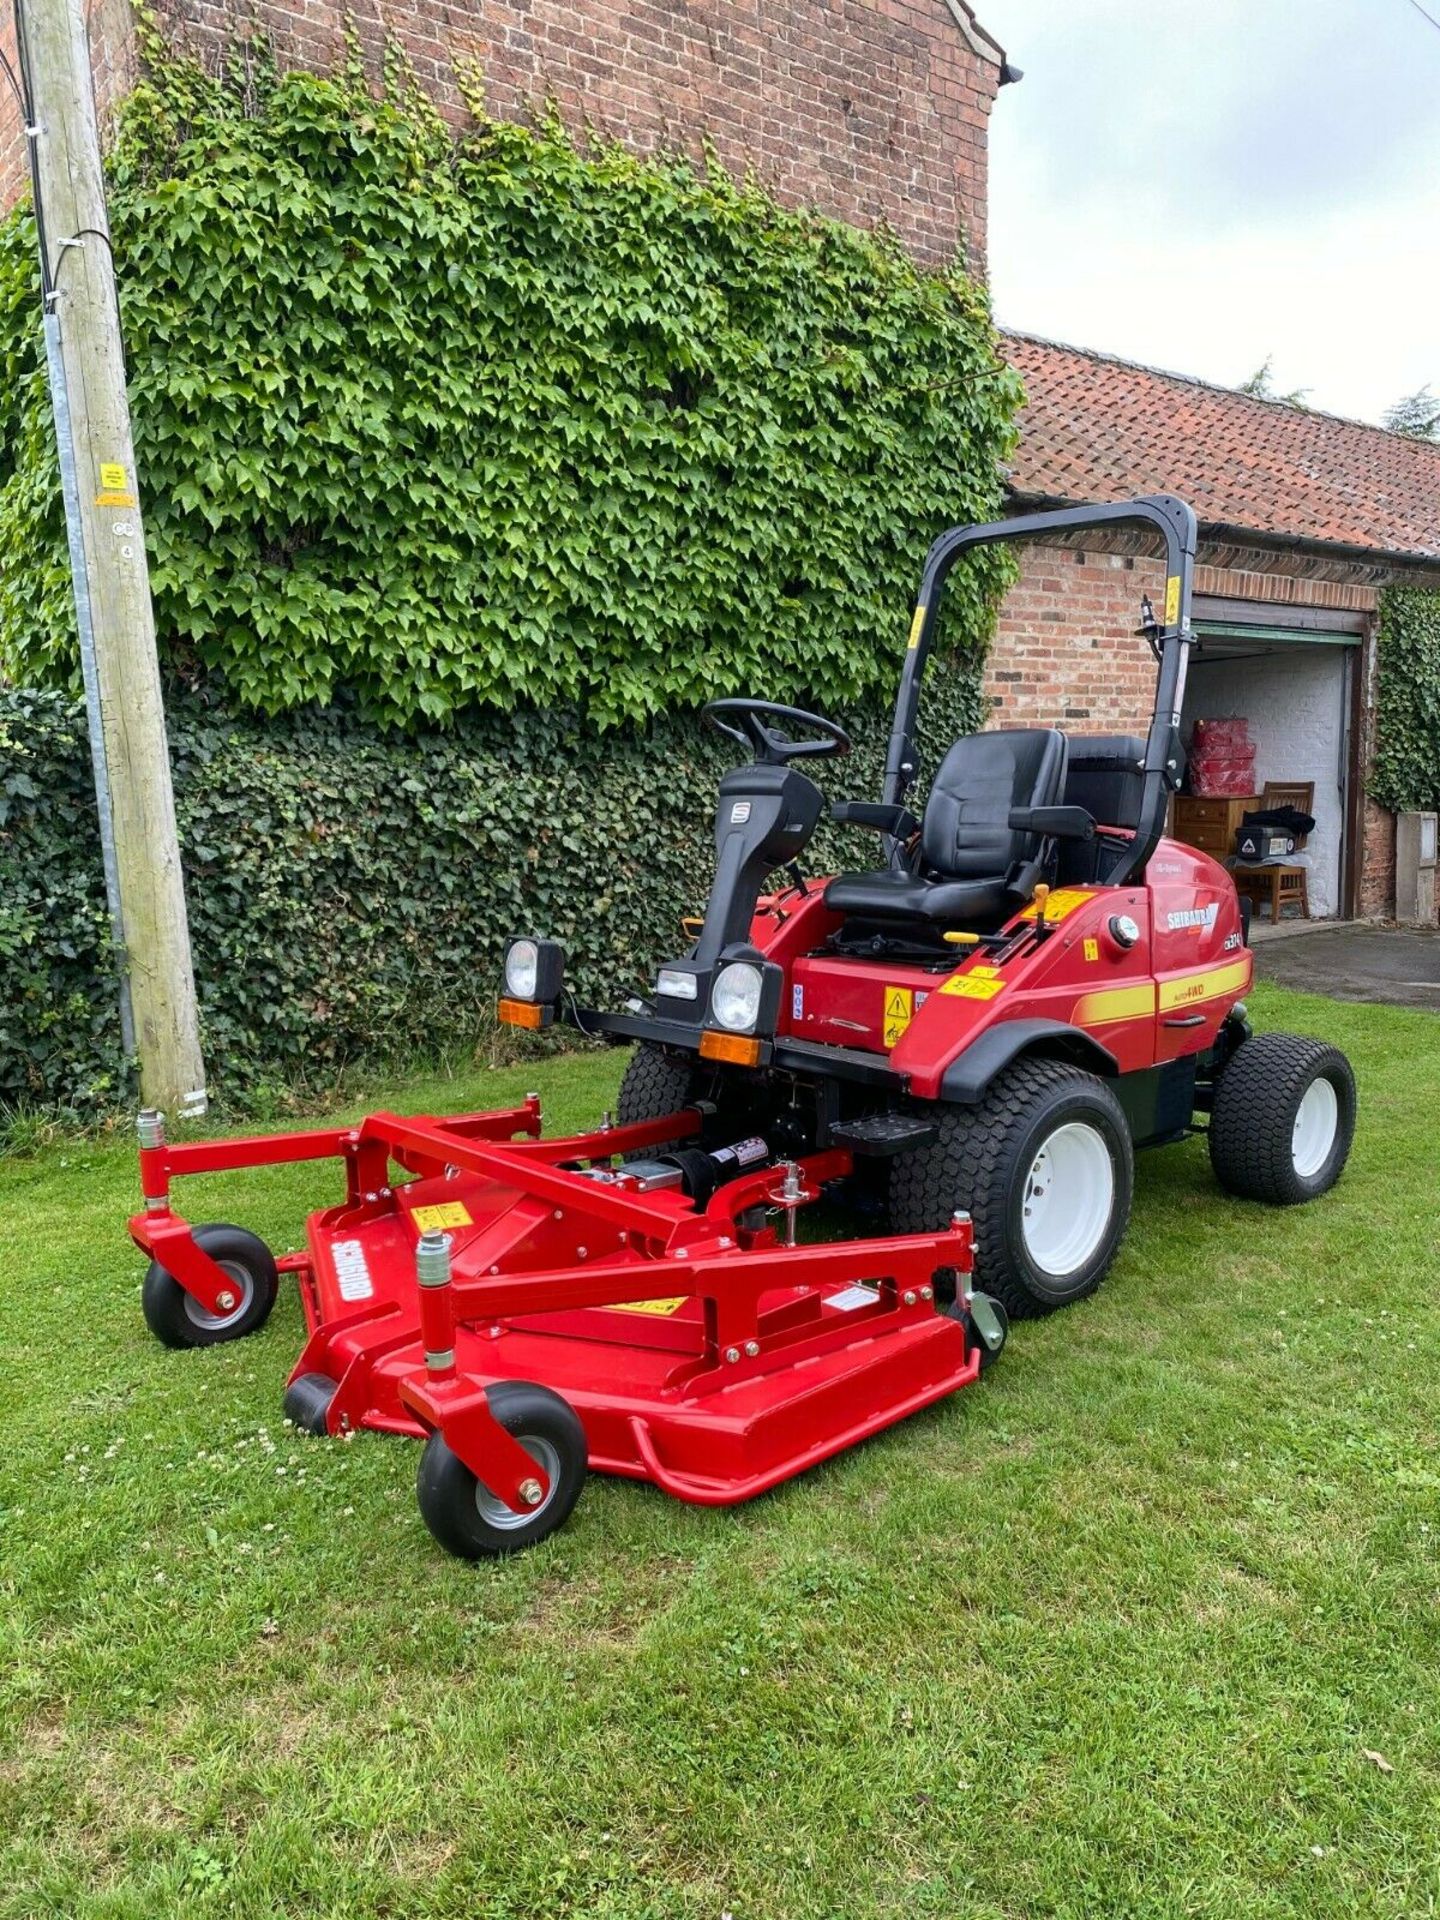 SHIBAURA CM374 UPFRONT ROTARY MOWER, 37HP, BRAND NEW 60" CUT DECK NEVER USED, DIESEL, YEAR 2014 - Image 6 of 7